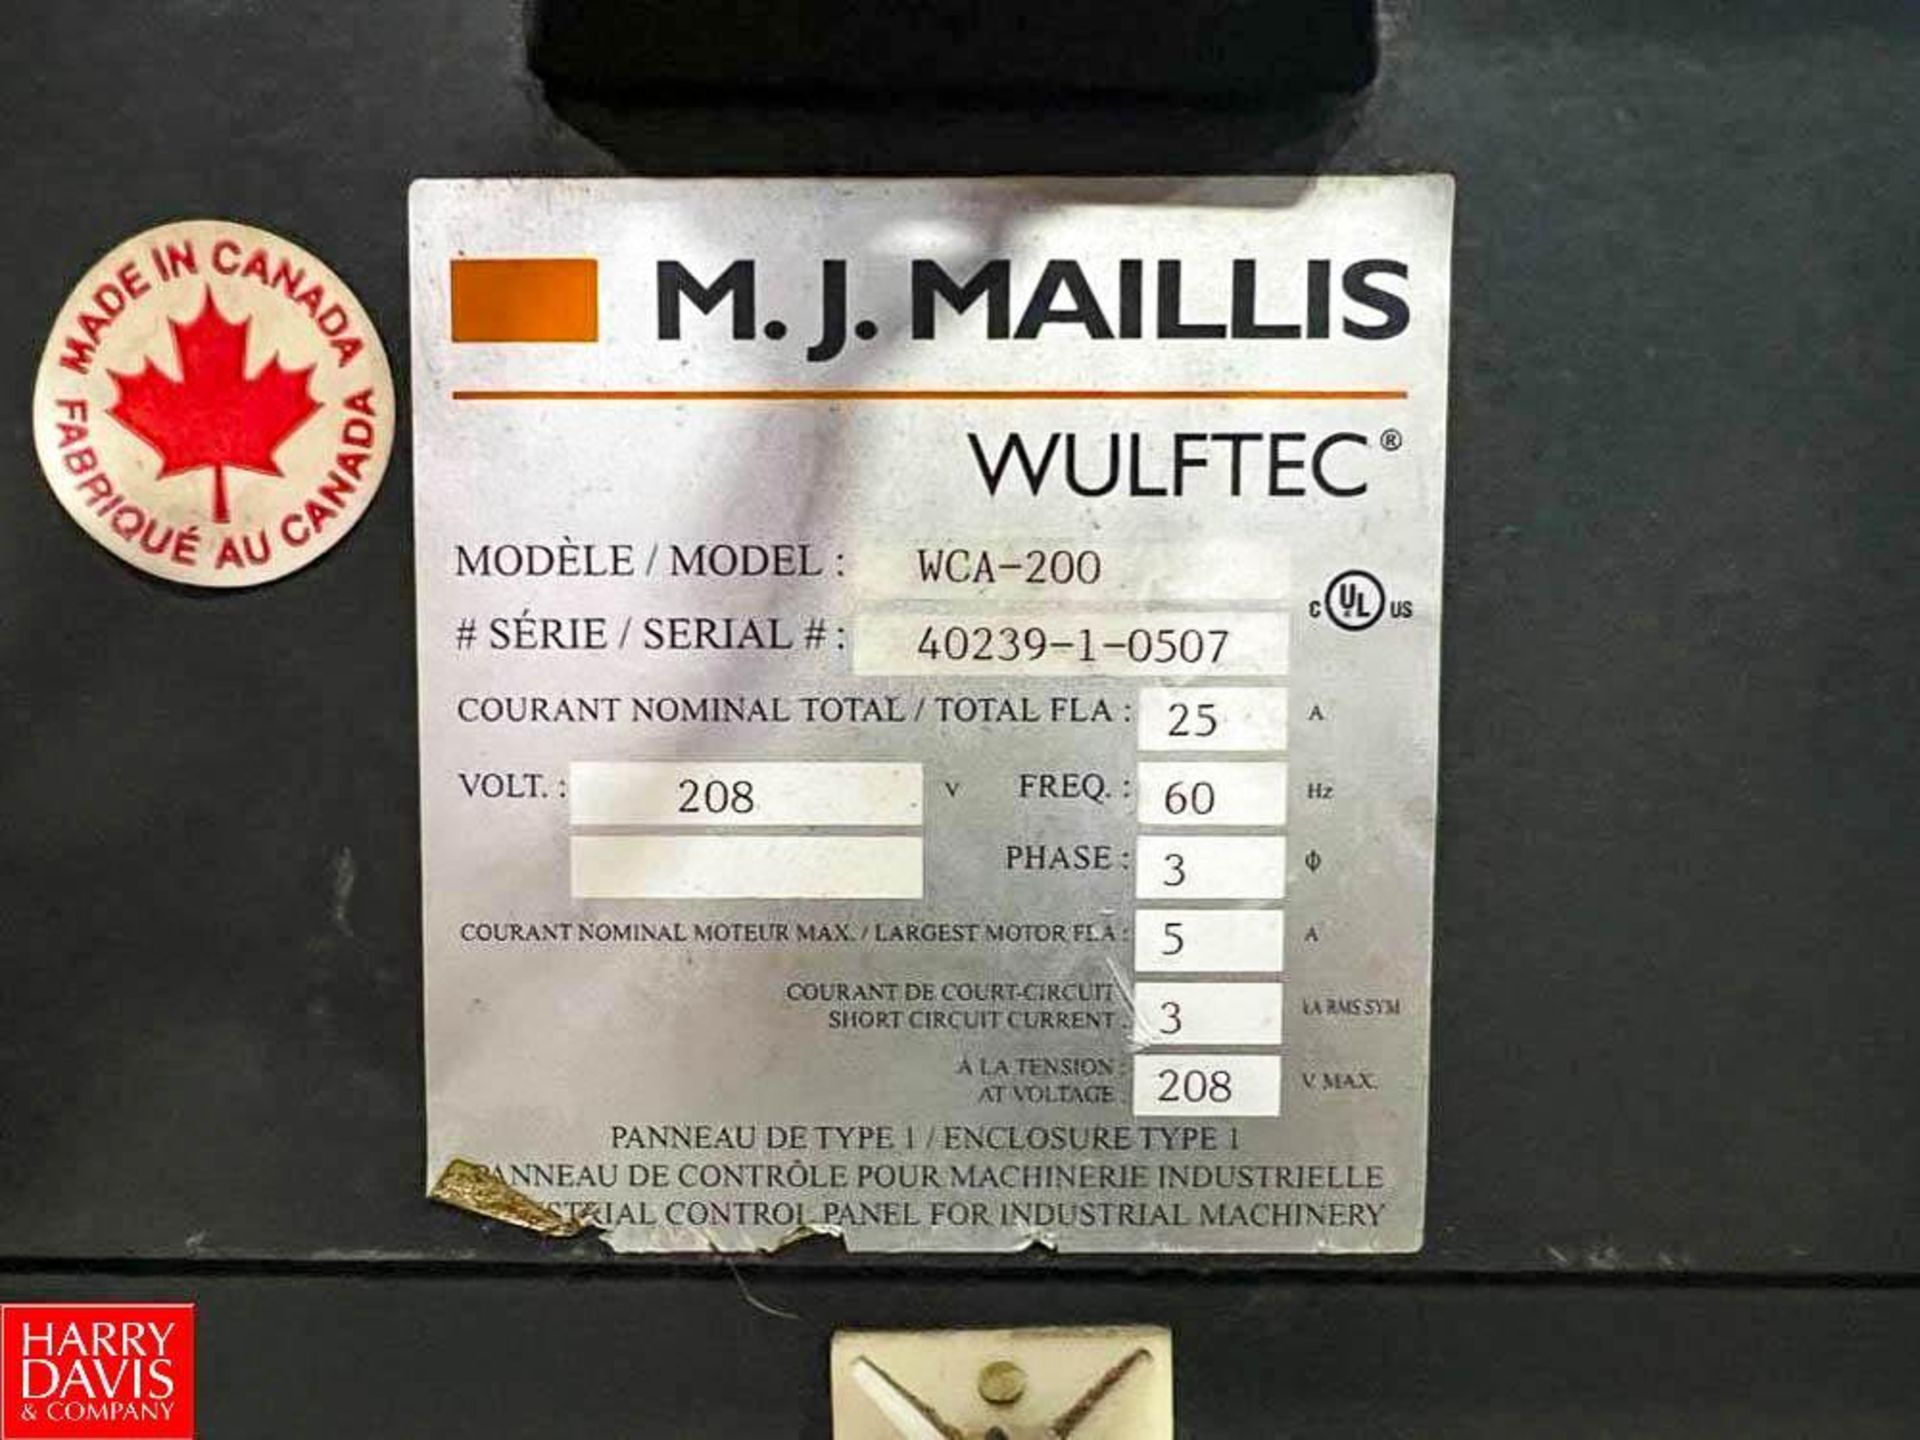 Wulftec Pallet Wrapper, Model: WCA-200, S/N: 40239-1-0507 with Allen-Bradley PanelView Plus 600 Touc - Image 2 of 8